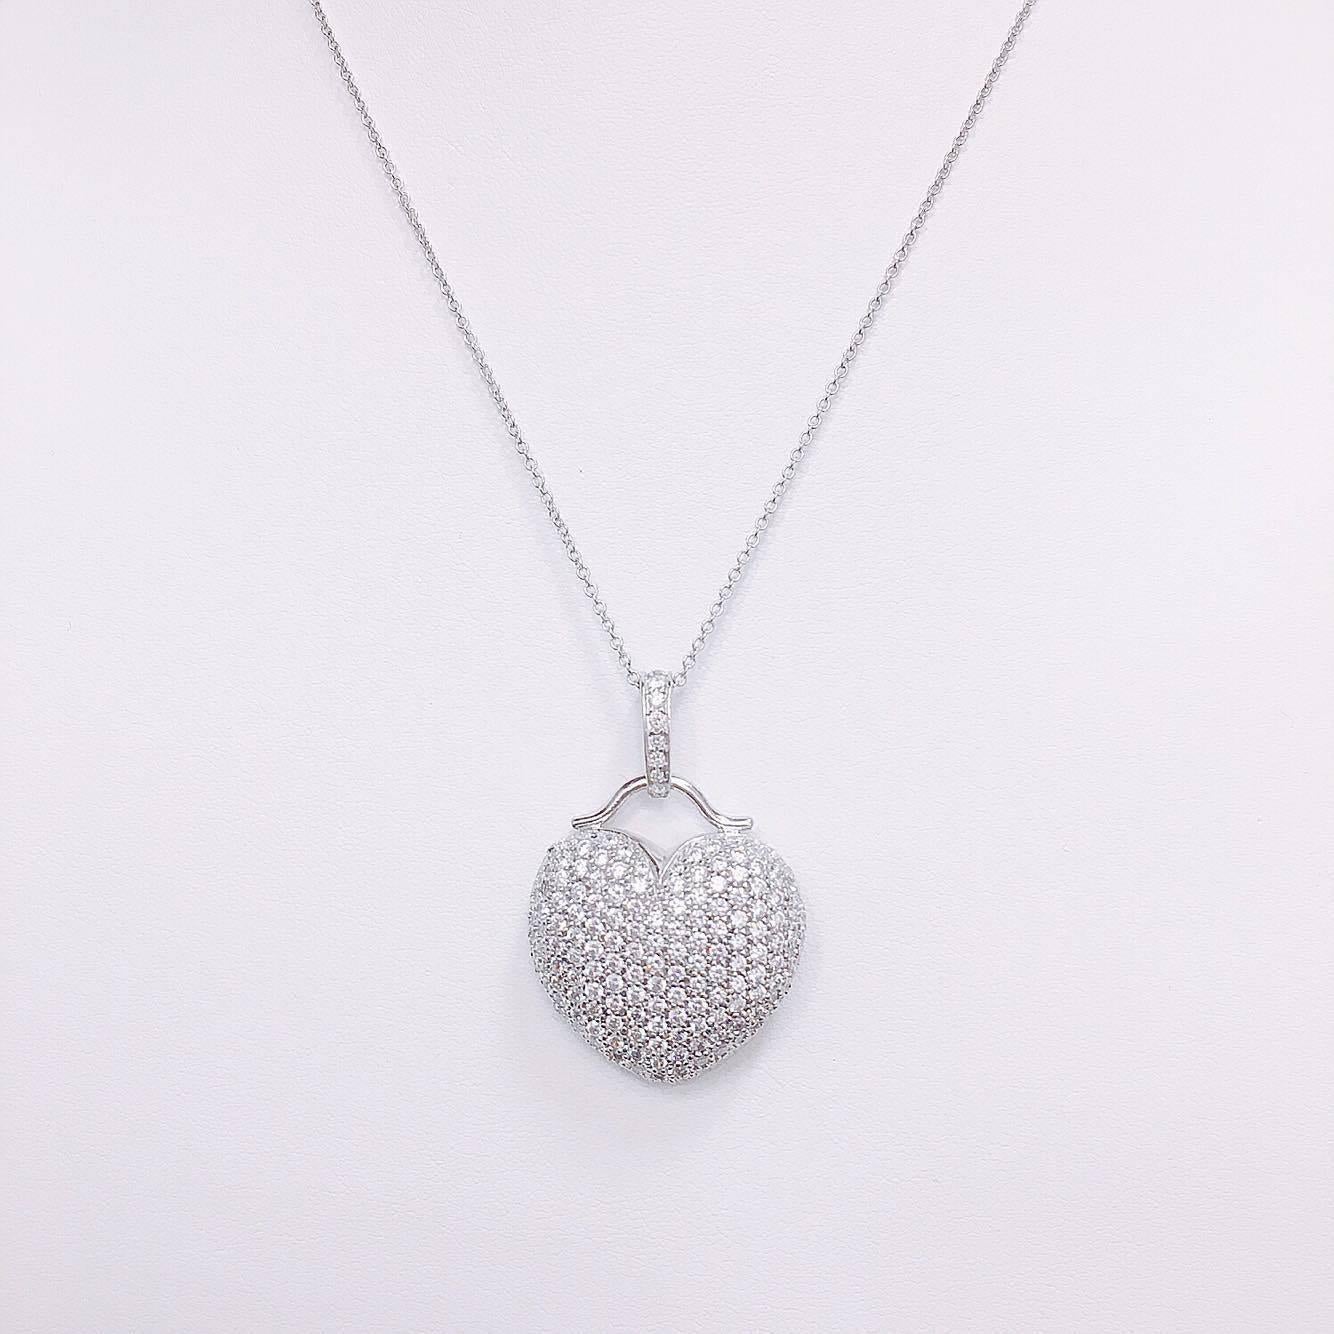 Approx. 3.00 carats total weight diamonds.The finest conflict free diamonds set in our unique diamond necklace. (Standard length is 17inch- 18inch, however we can alter this necklace to any size). Can be ordered in 14k or 18k white/yellow/rose gold